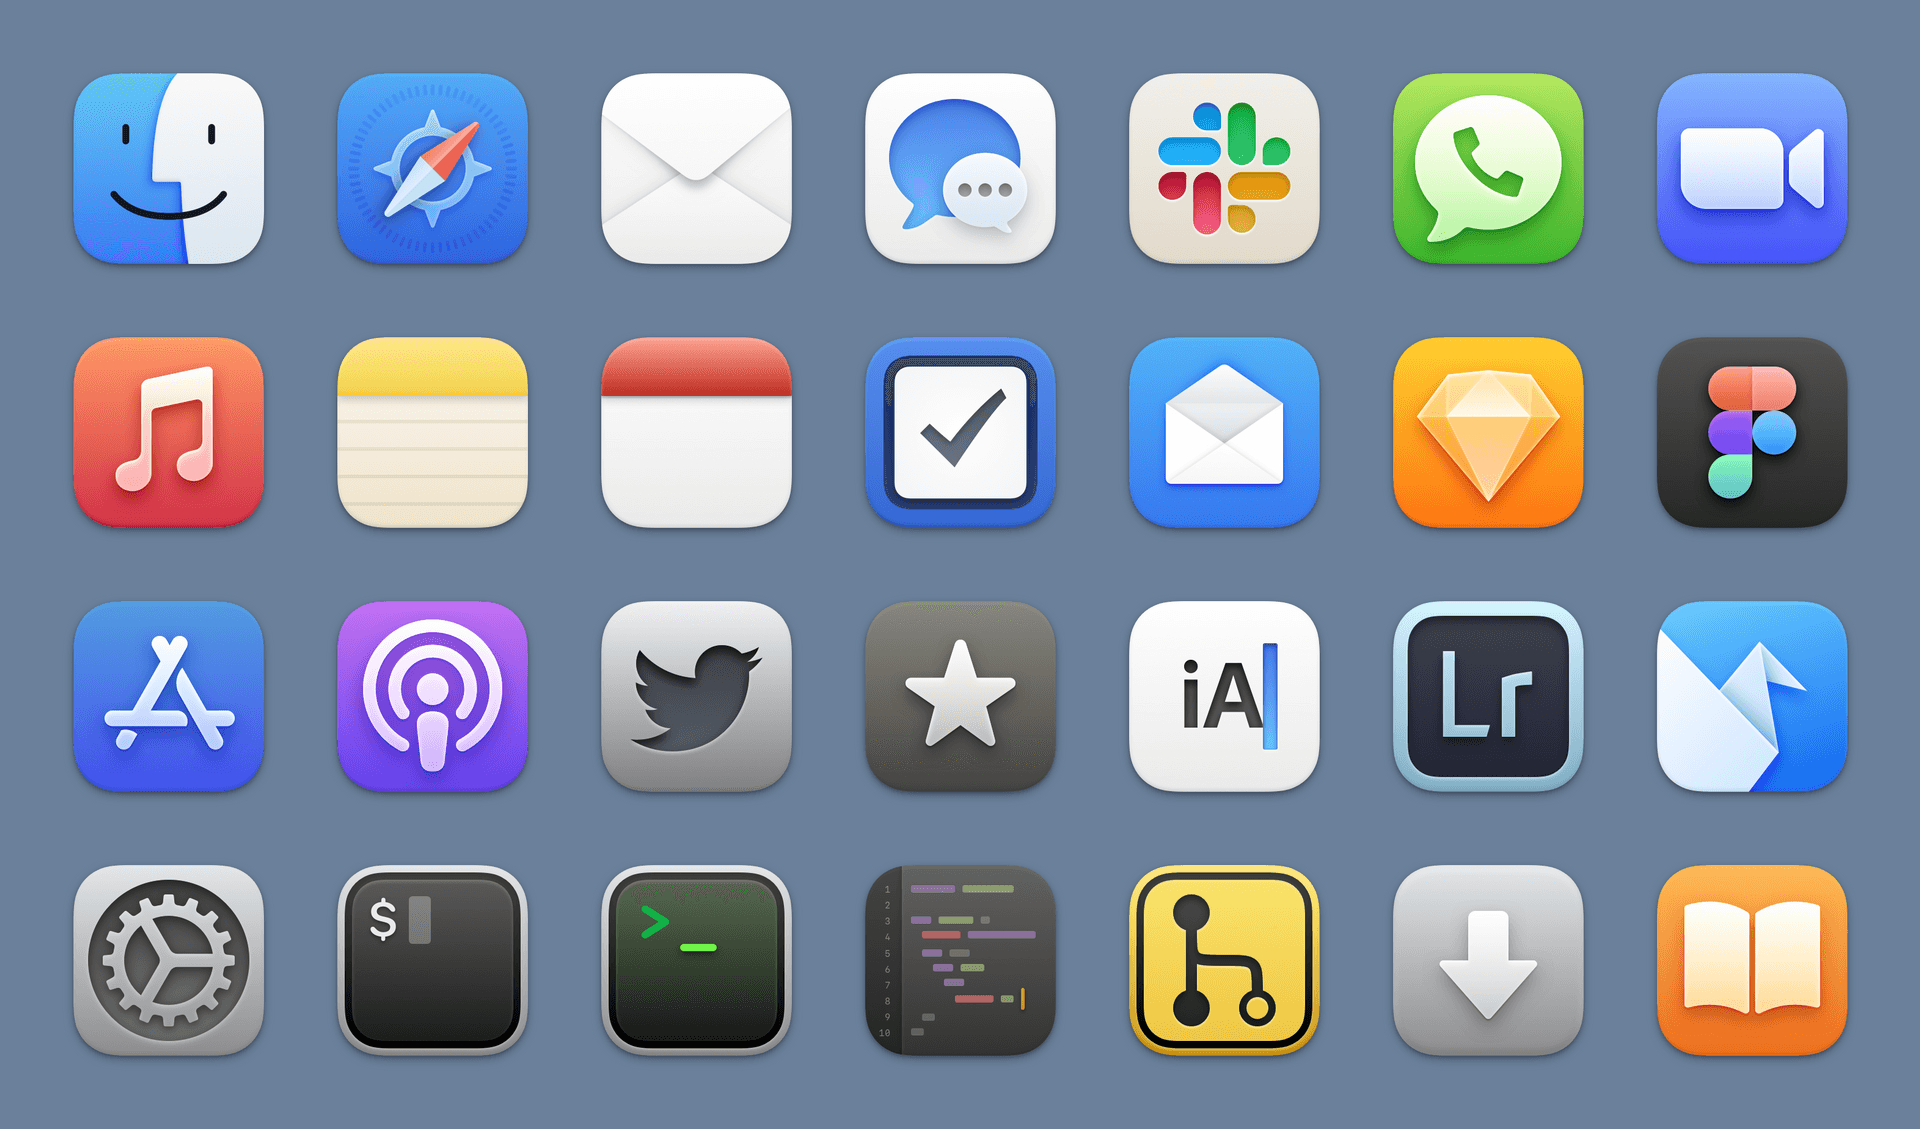 A grid of macOS inspired icons.